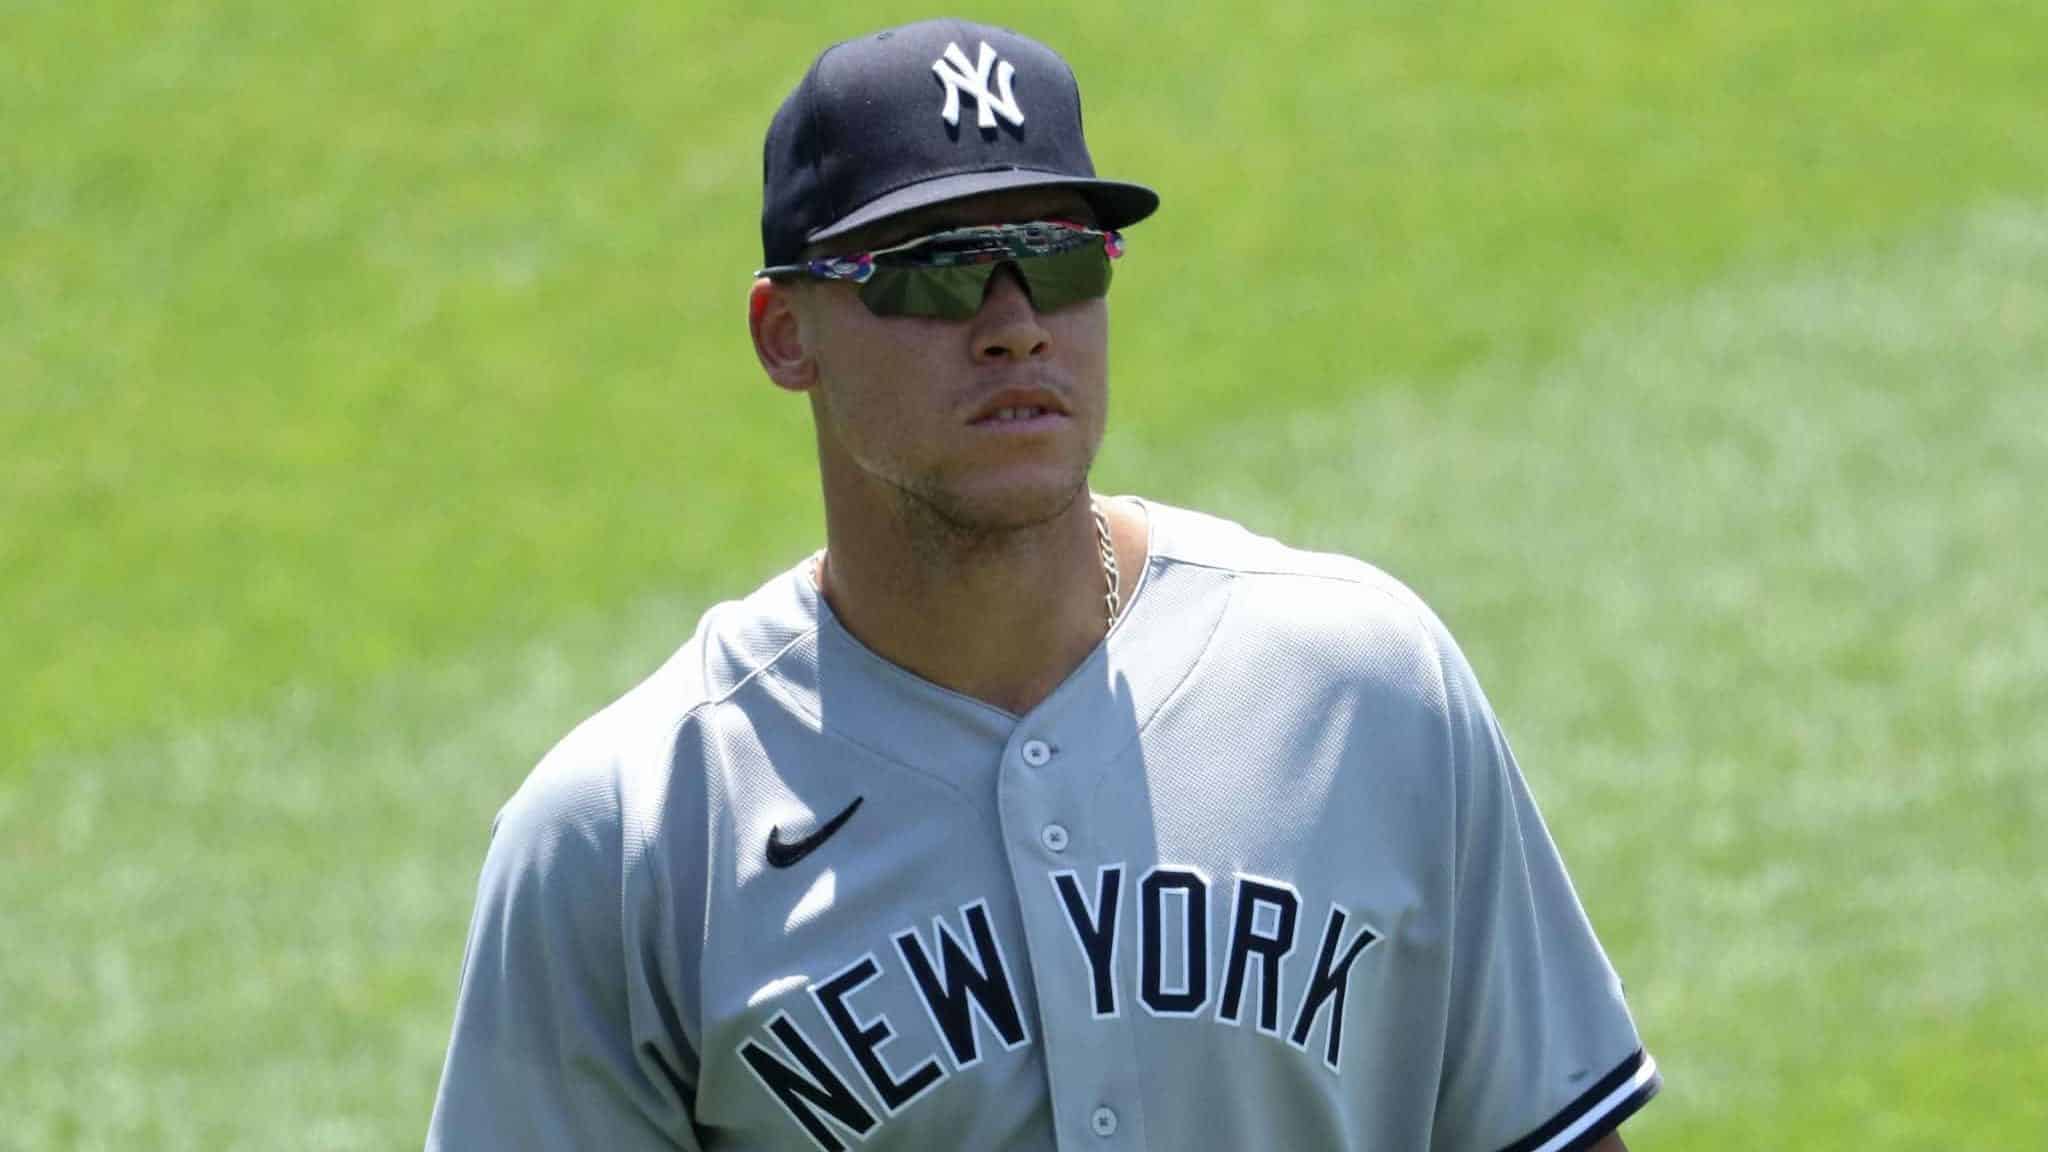 WASHINGTON, DC - JULY 26: Aaron Judge #99 of the New York Yankees looks on against the Washington Nationals during the fourth inning at Nationals Park on July 26, 2020 in Washington, DC.